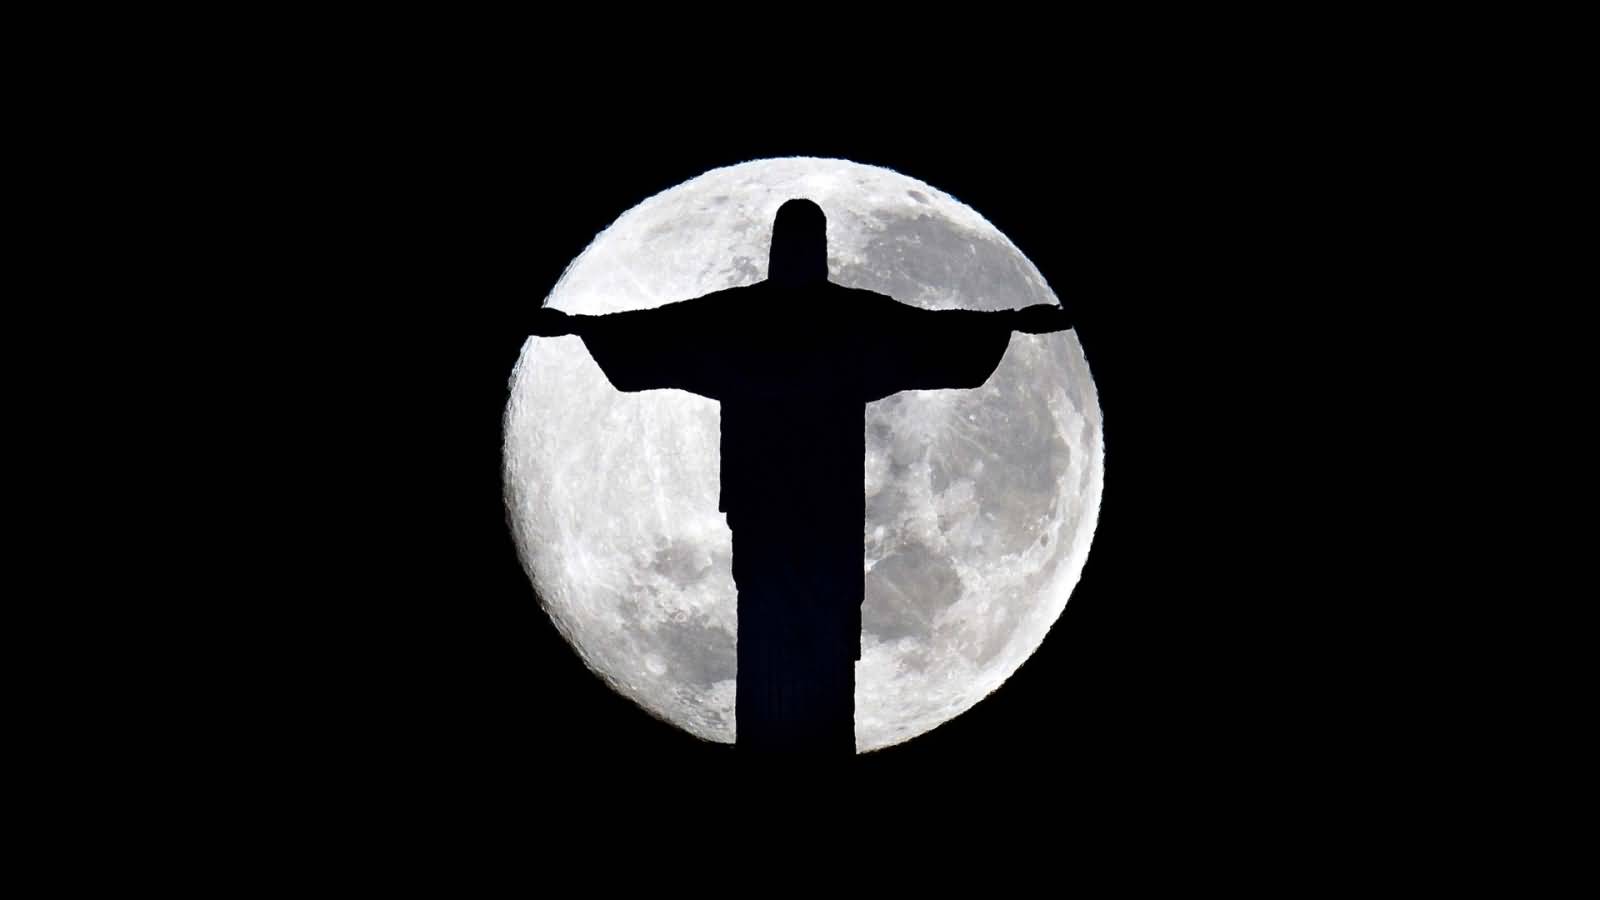 Super Moon Behind The Christ the Redeemer Statue During Night